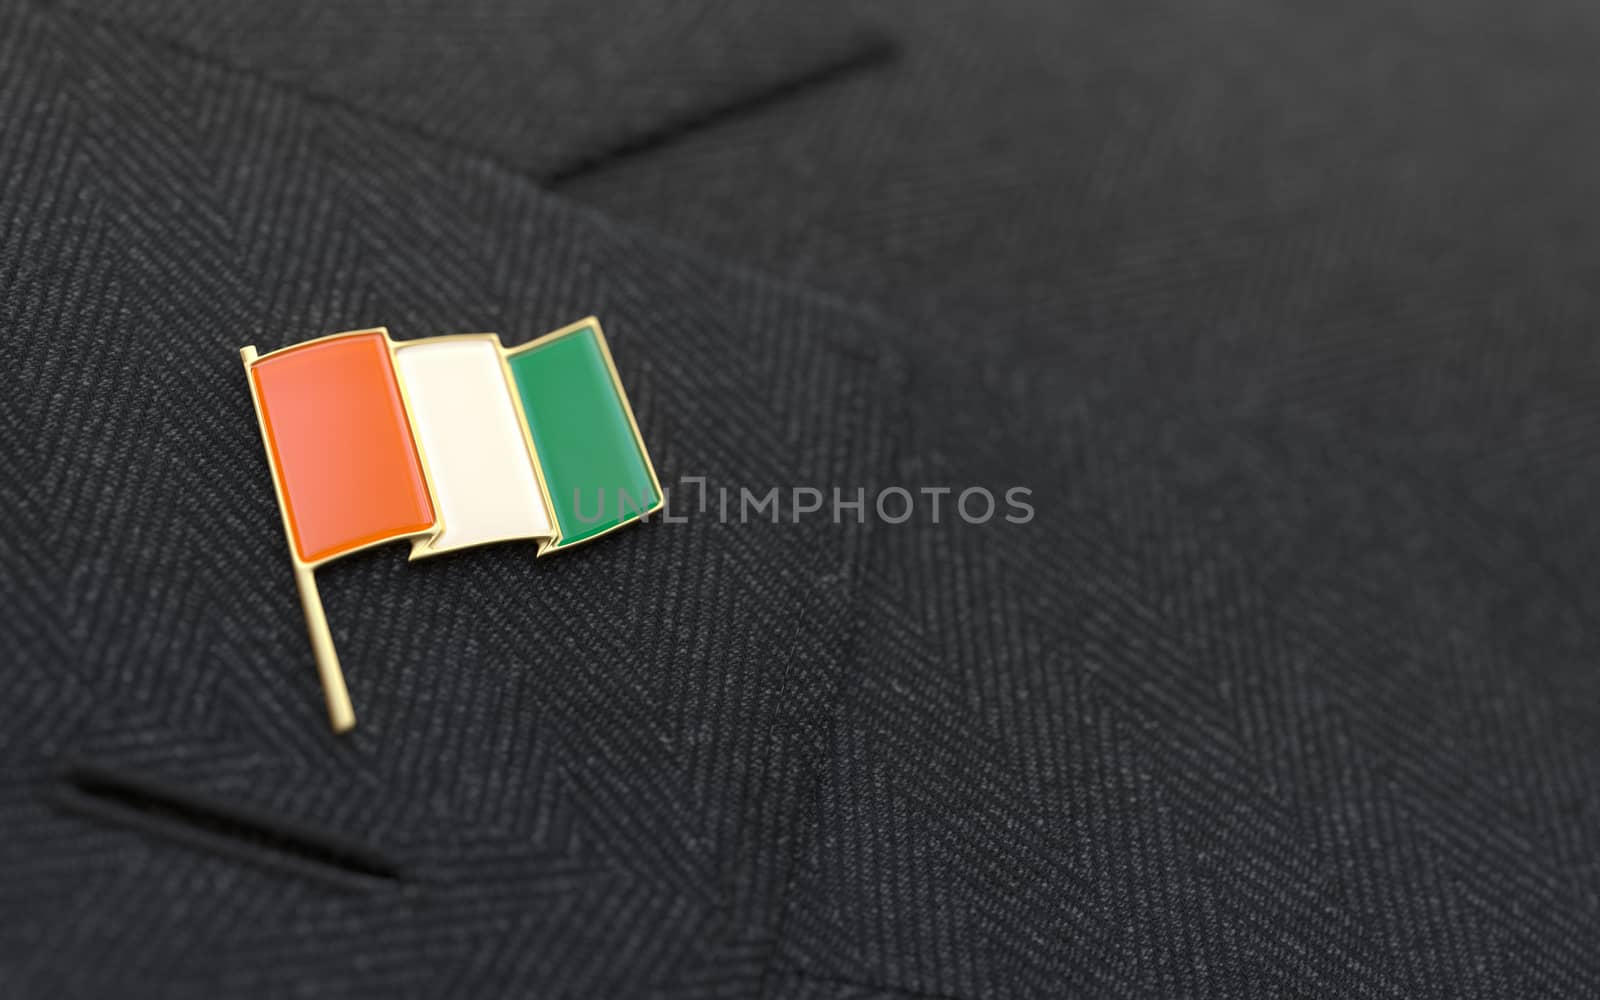 Ivory Coast flag lapel pin on the collar of a business suit jacket shows patriotism